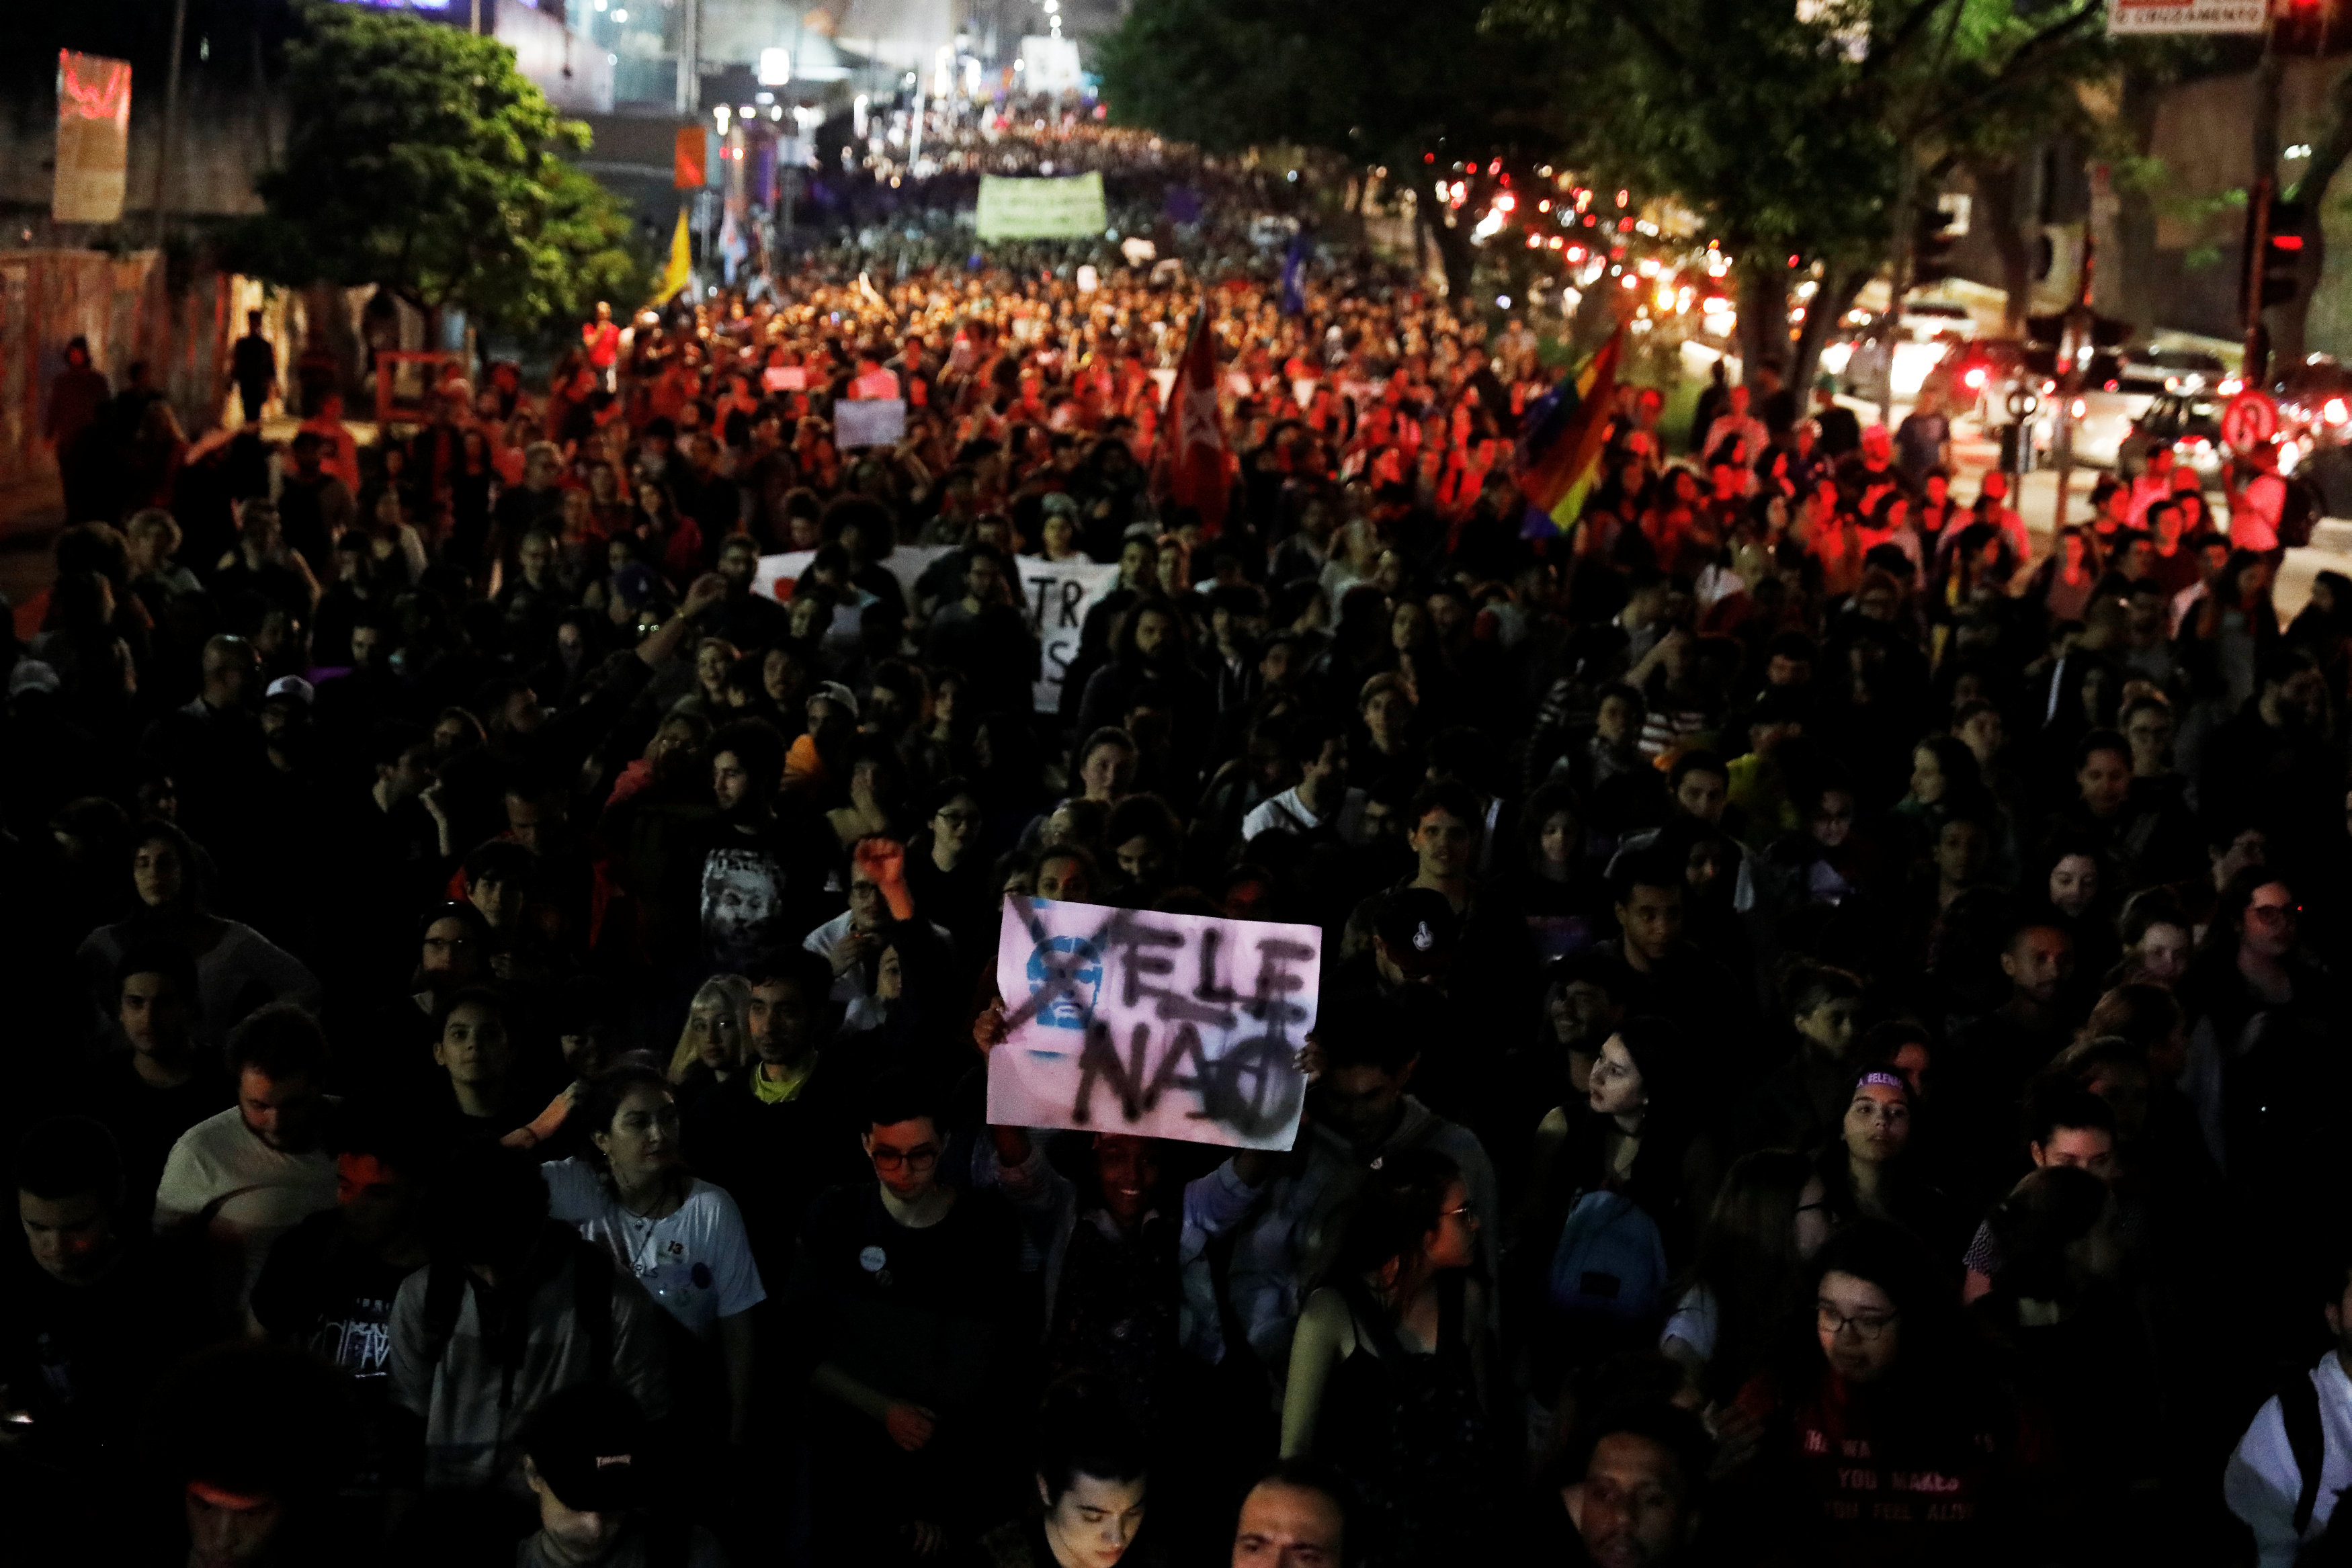 2018-10-31T005926Z_390514690_RC129A2F8480_RTRMADP_3_BRAZIL-ELECTION-PROTEST